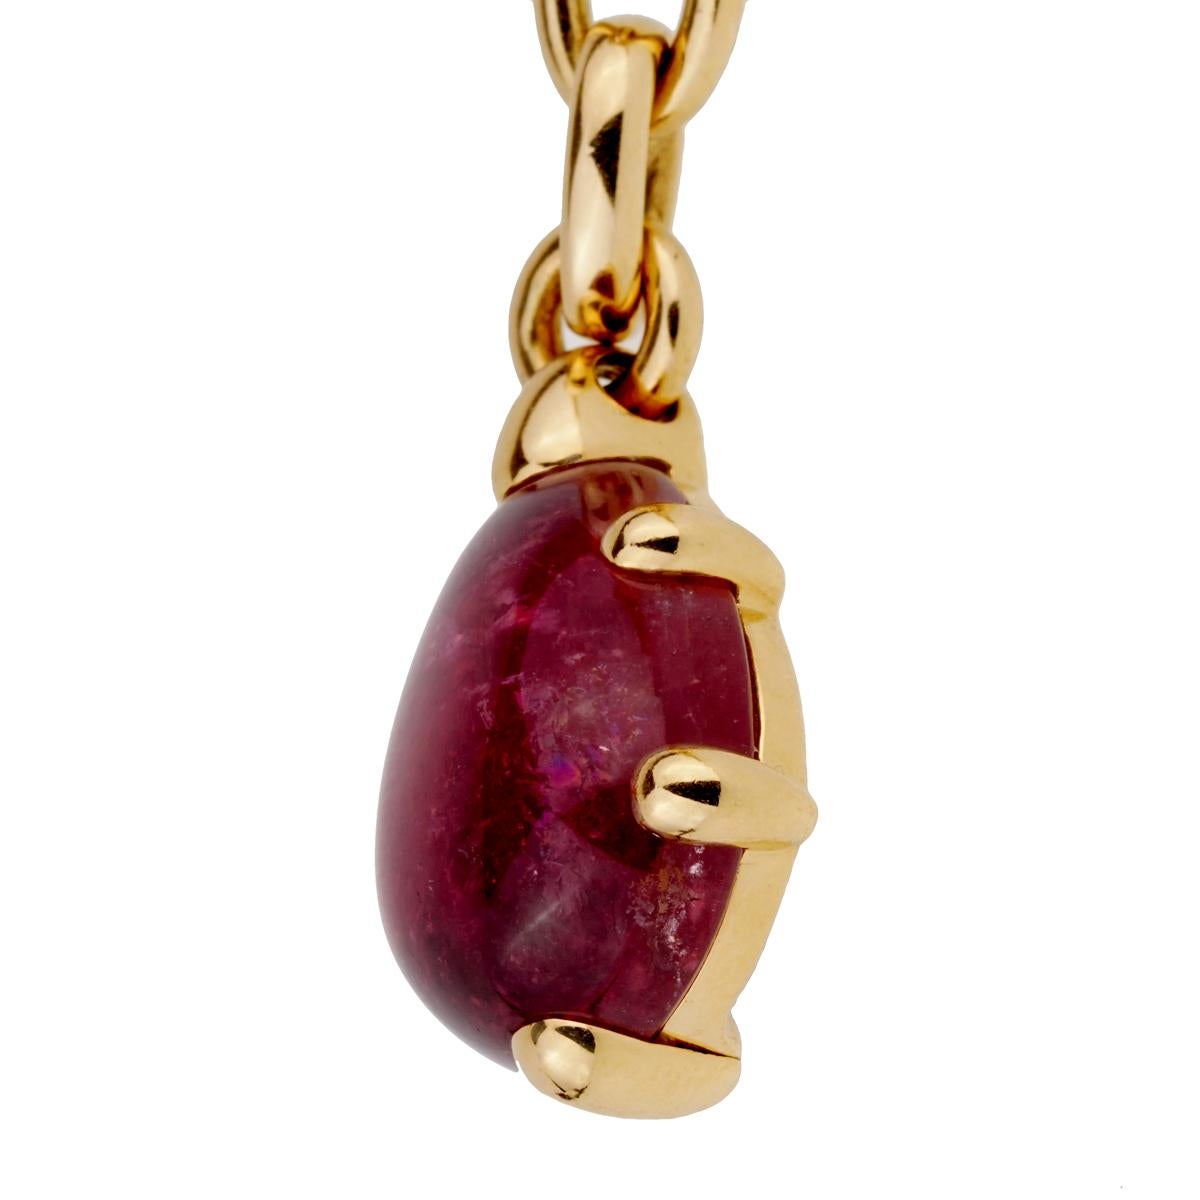 A magnificent Pomellato necklace featuring a pear shaped pink tourmaline in 18k yellow gold. The necklace weighs 98.4 grams